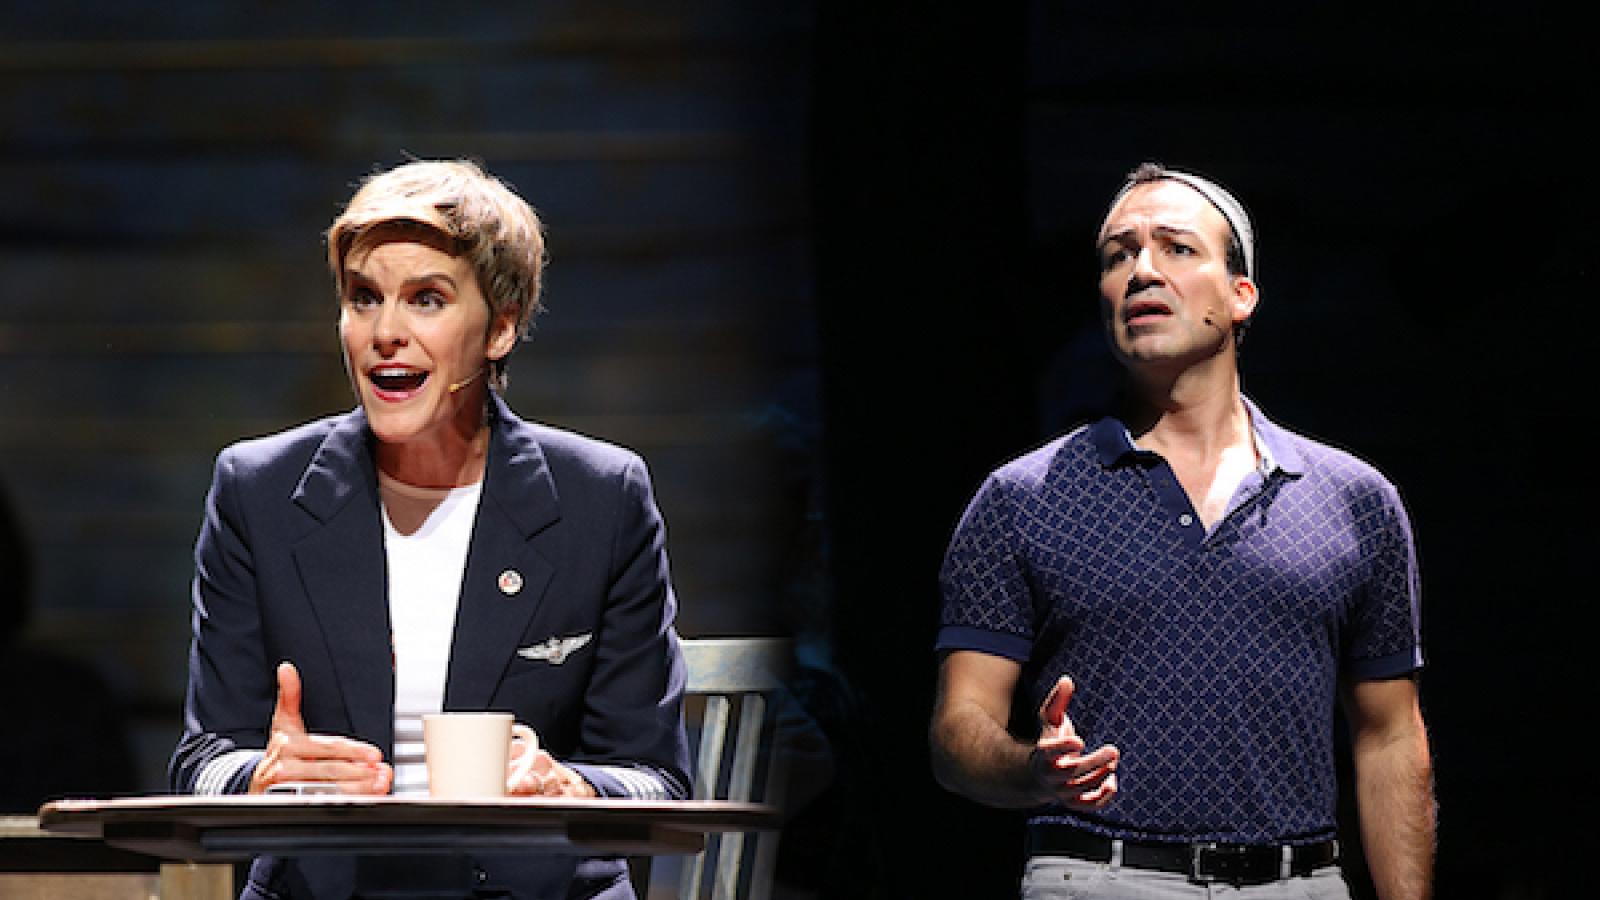 Jenn Colella and Caesar Samayoa in character for the musical Come From Away